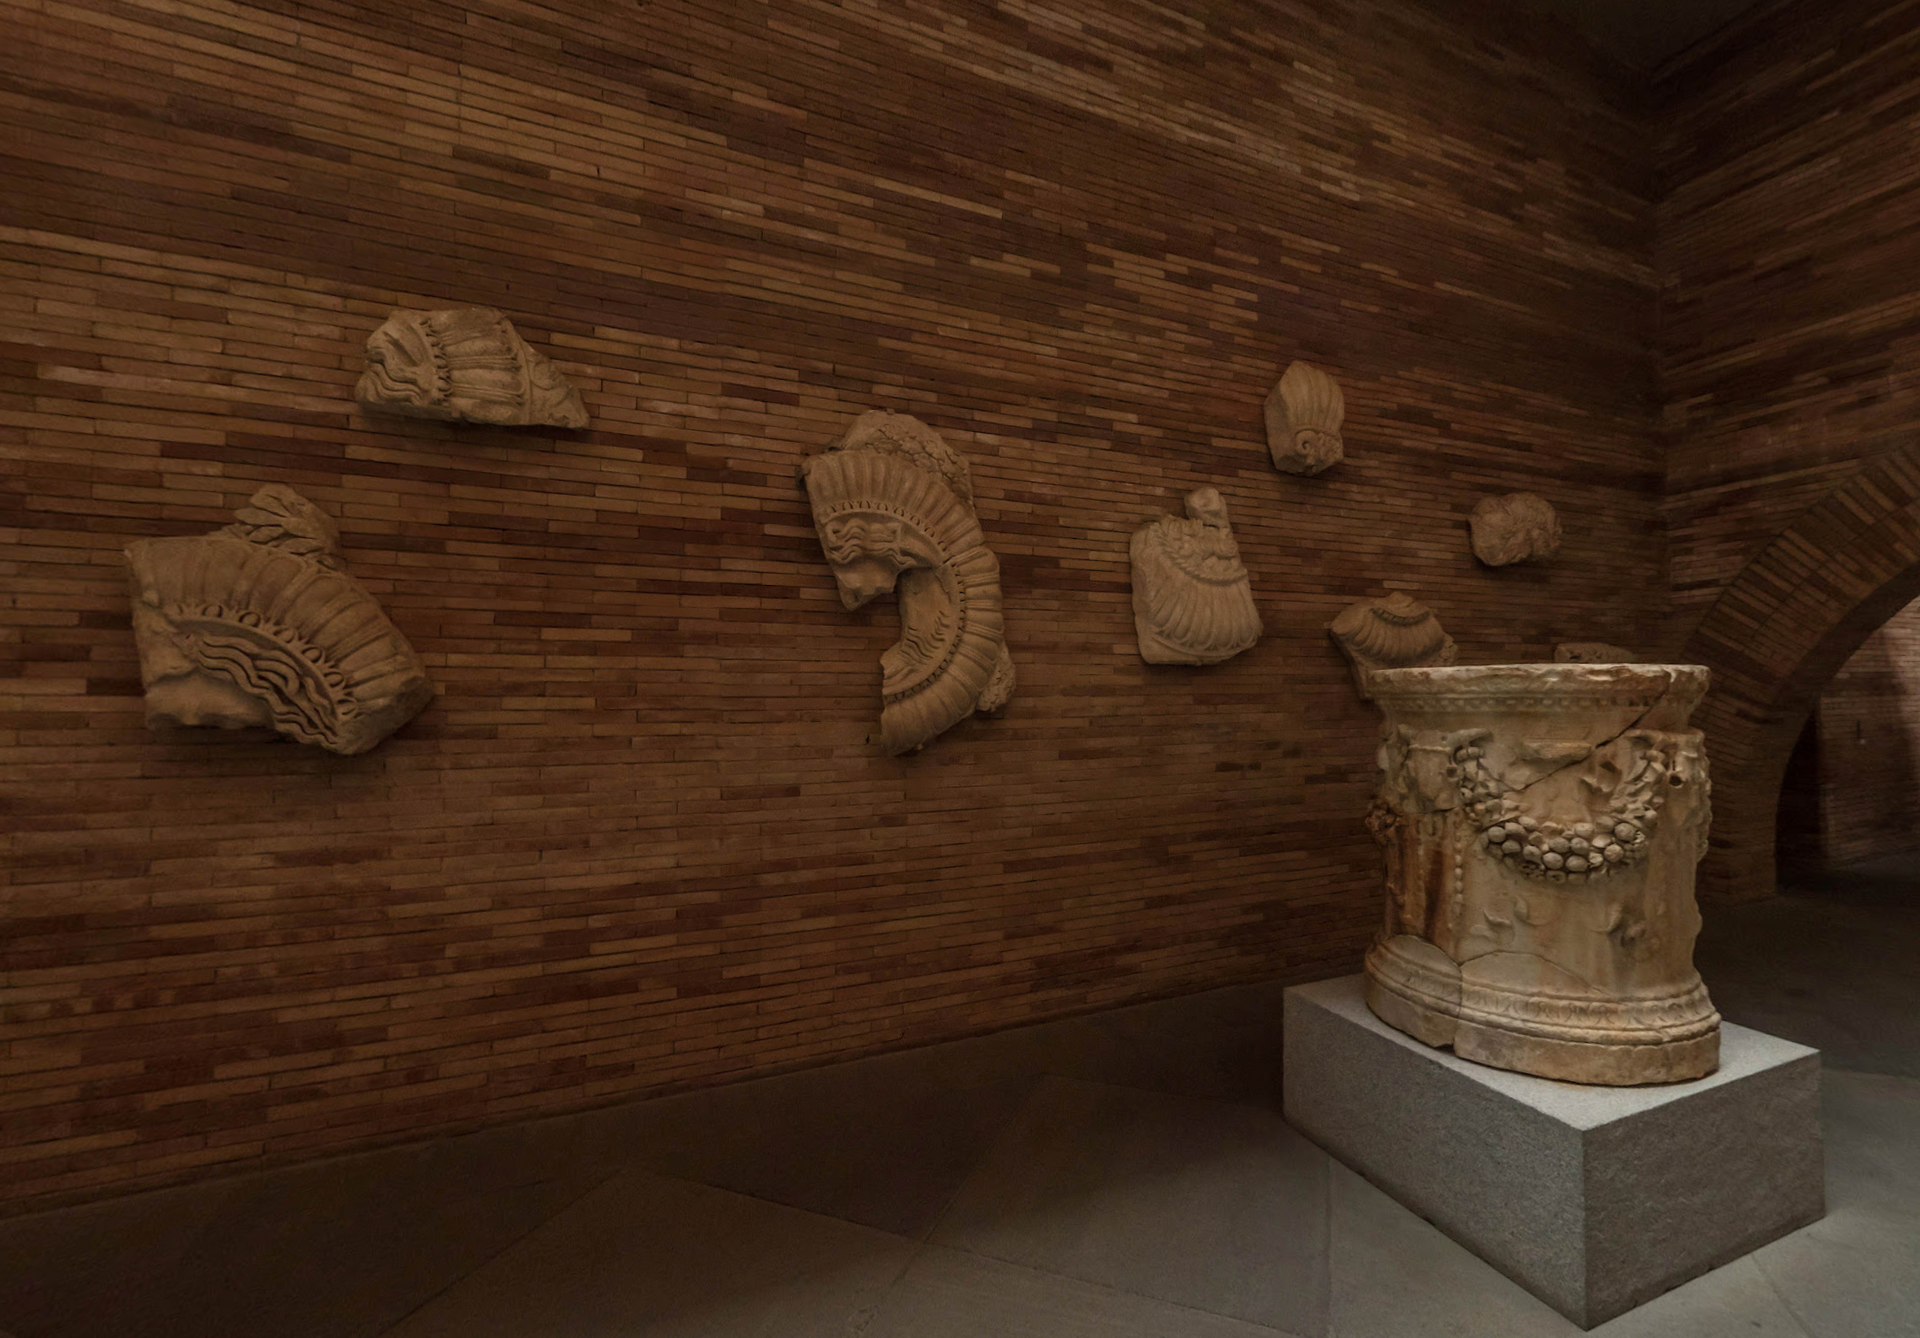 National Museum of Roman Art by Google Earth